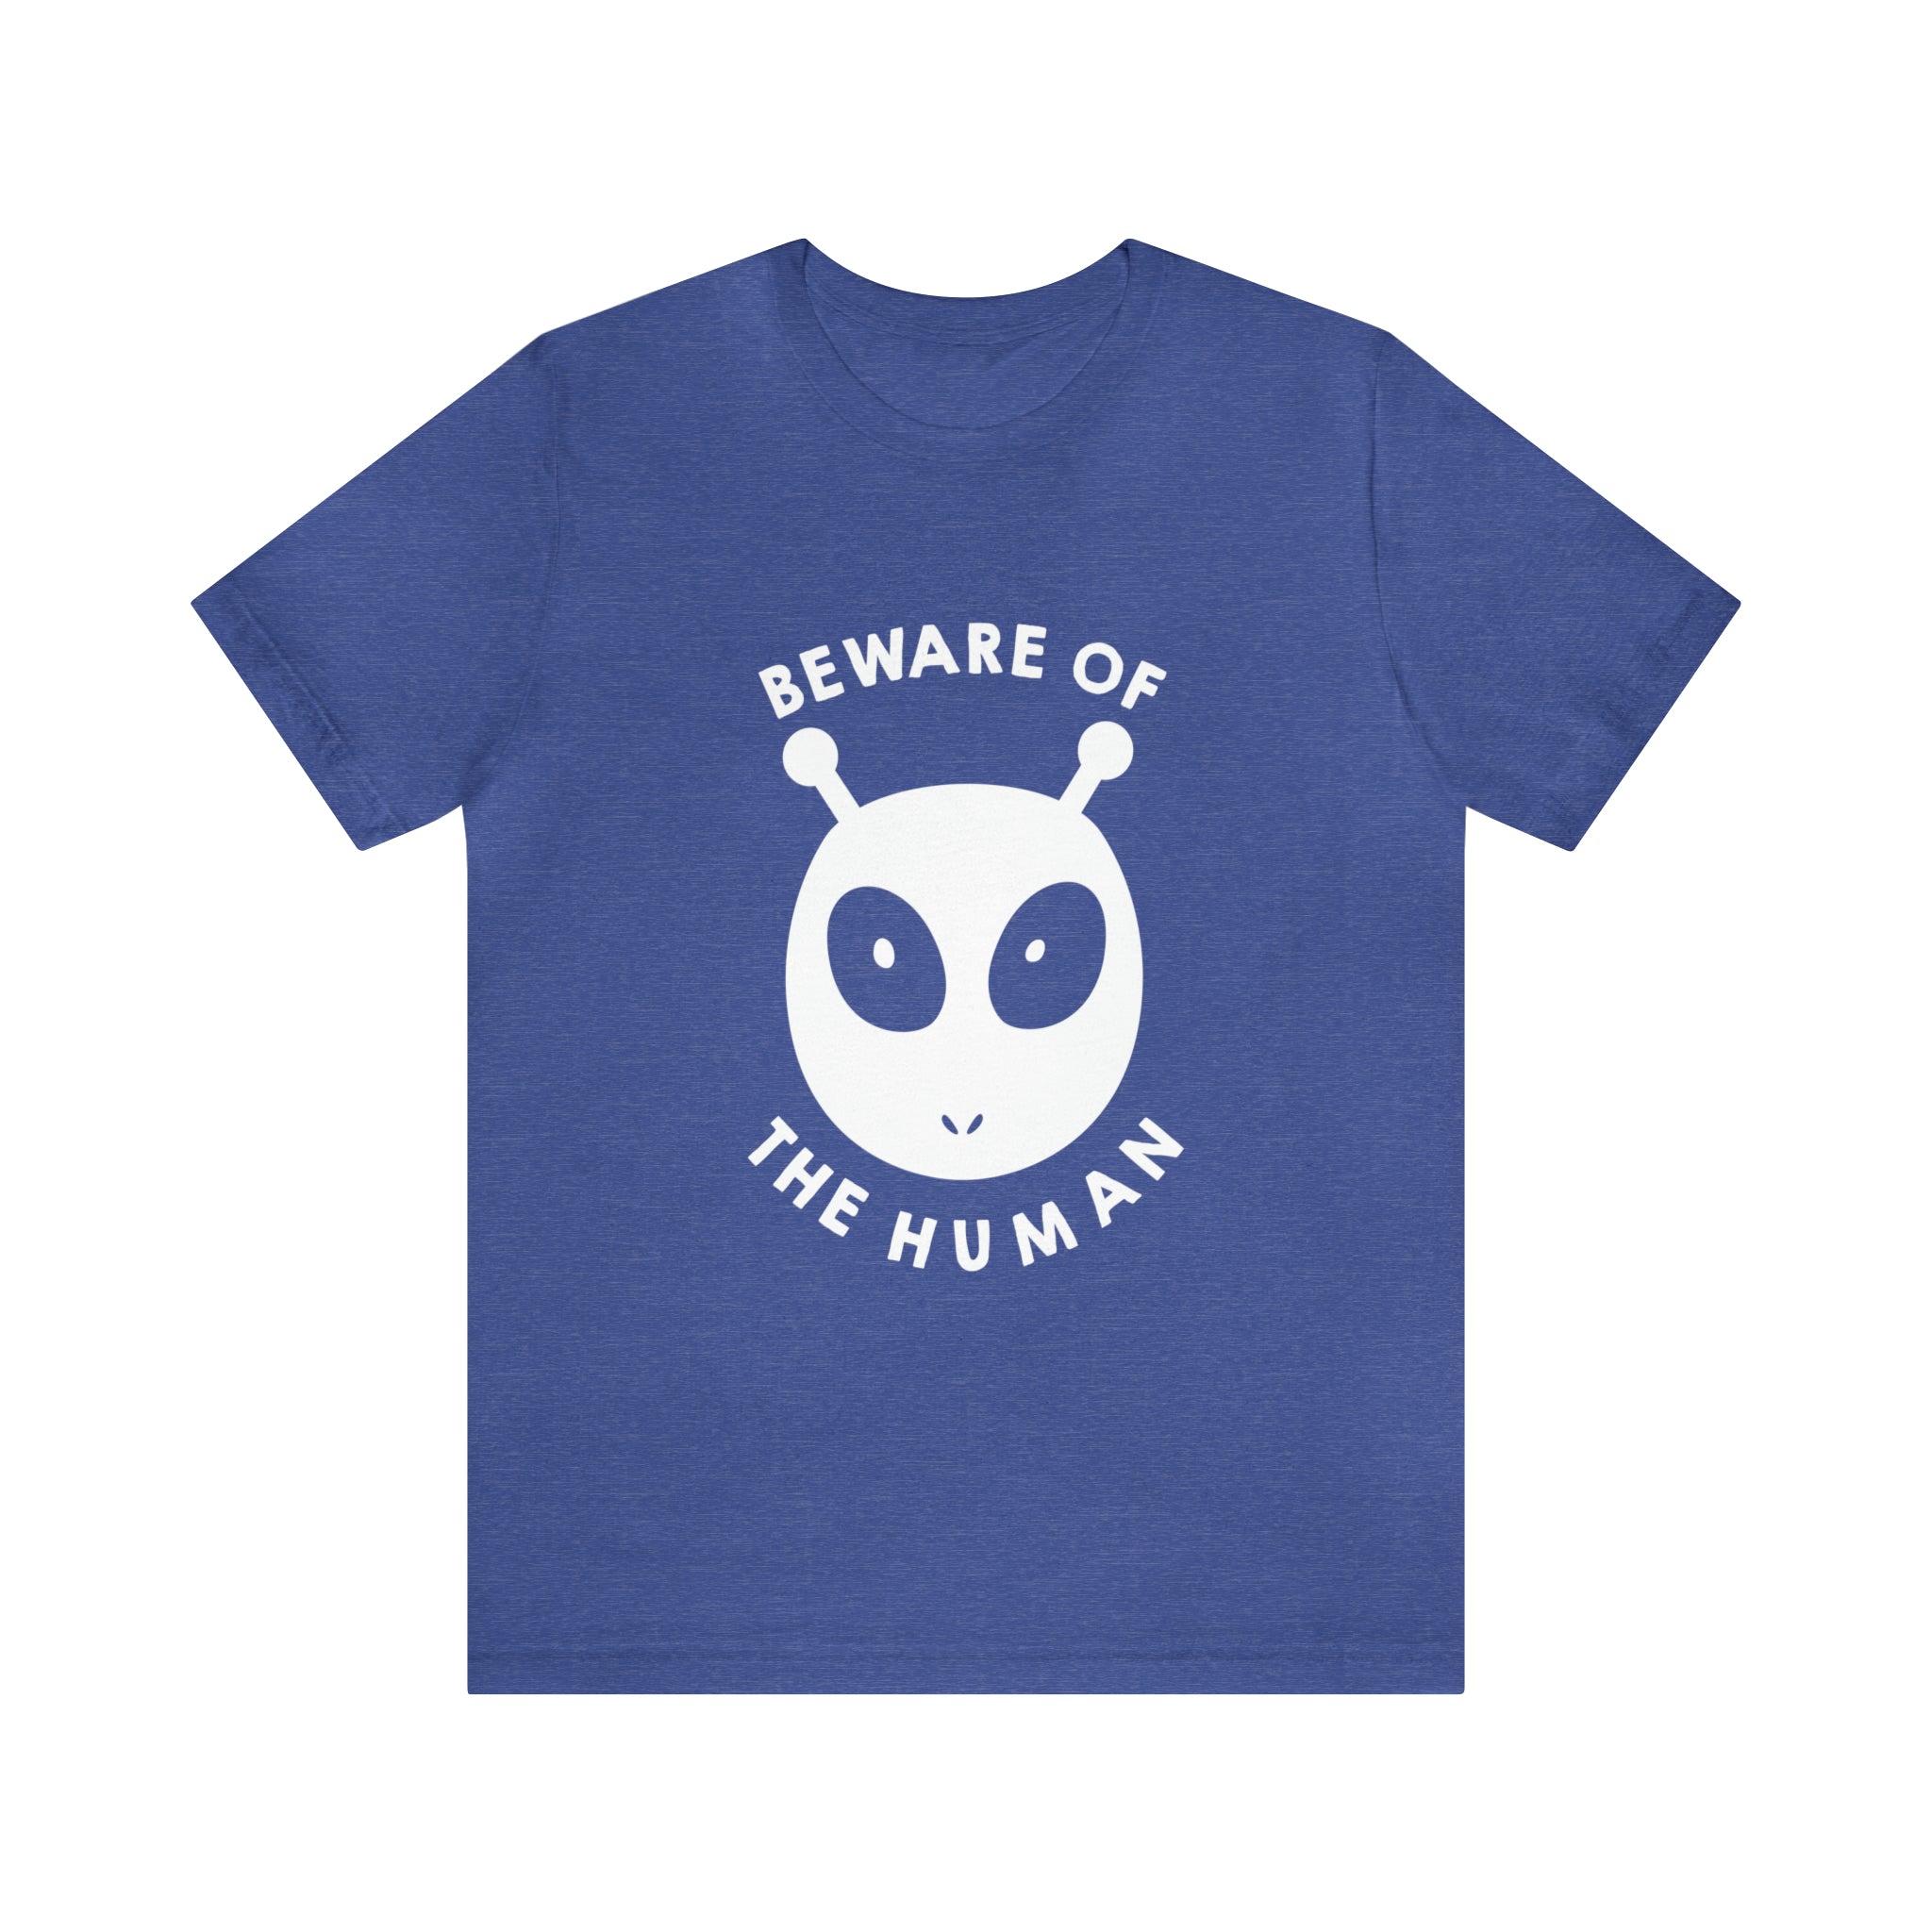 A Printify blue "Beware of the humans" T-Shirt.